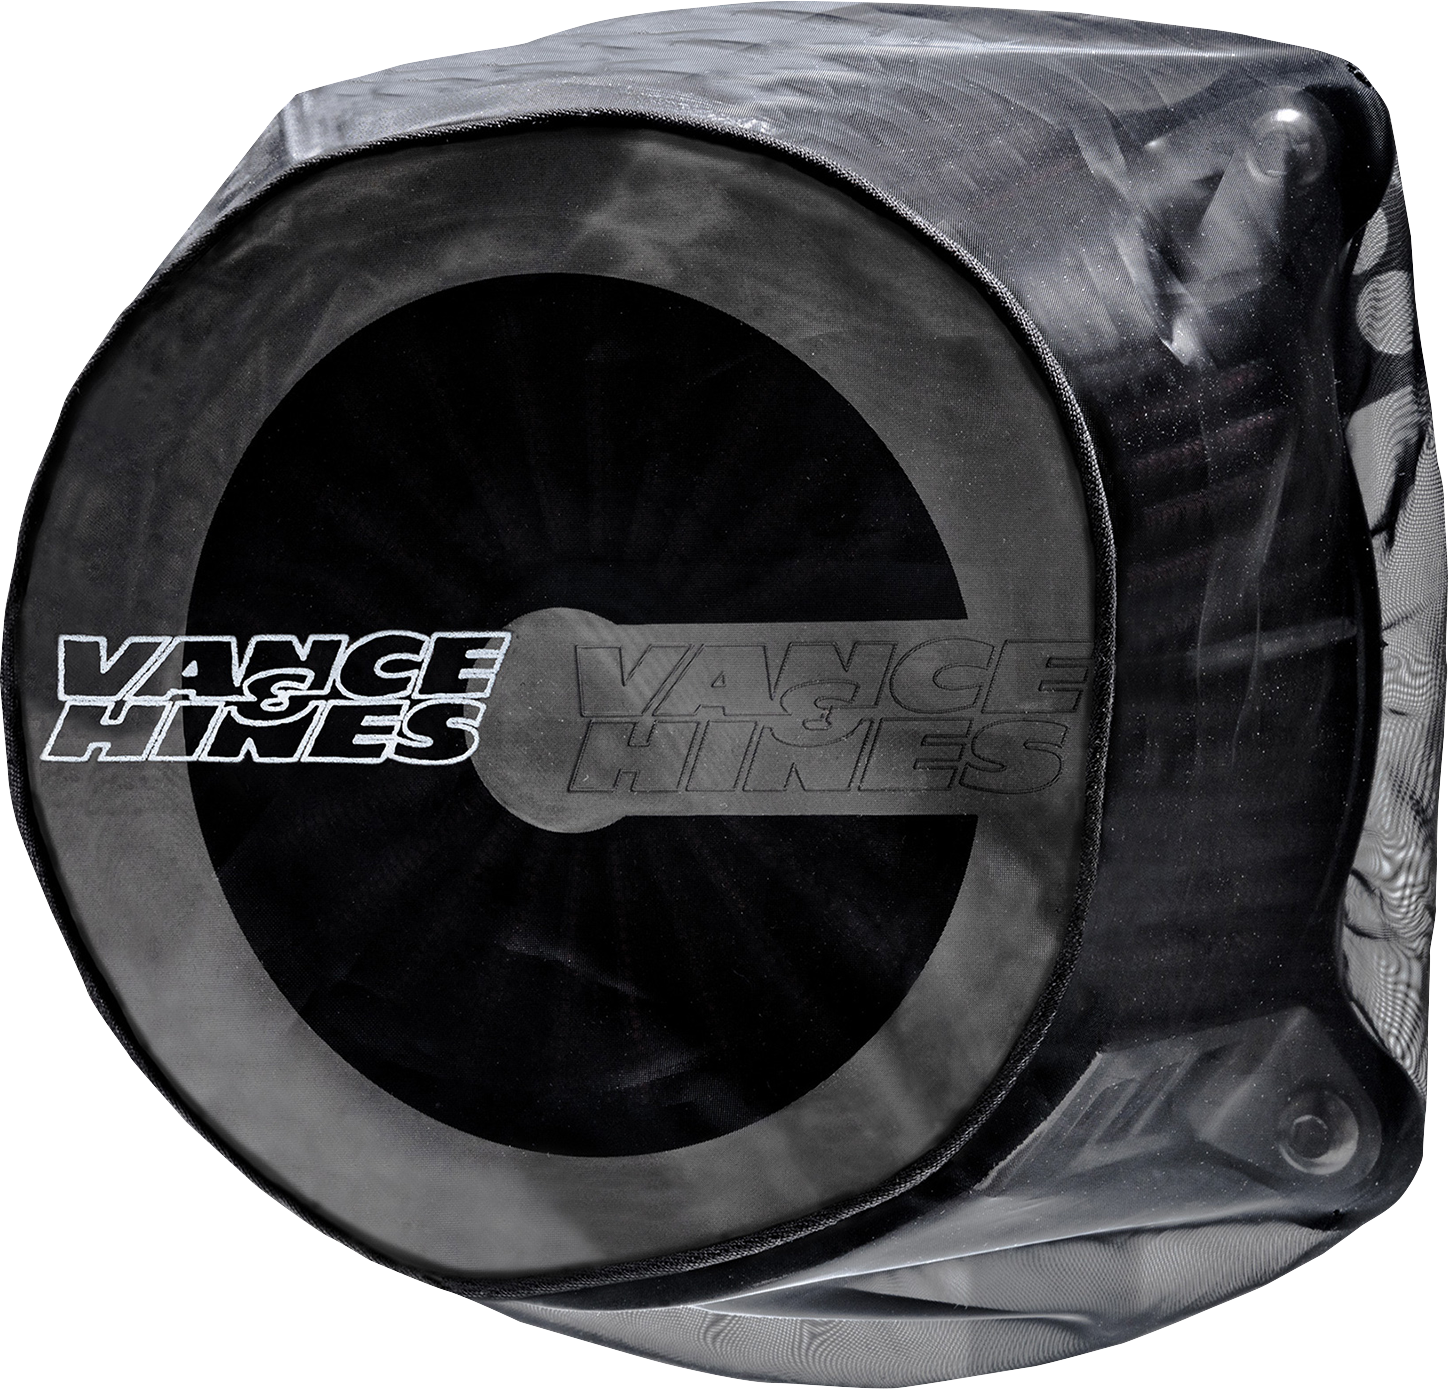 Vance & Hines VO2 Cage Fighter Air Filter Rain Sock Harley Davidson Motorcycle